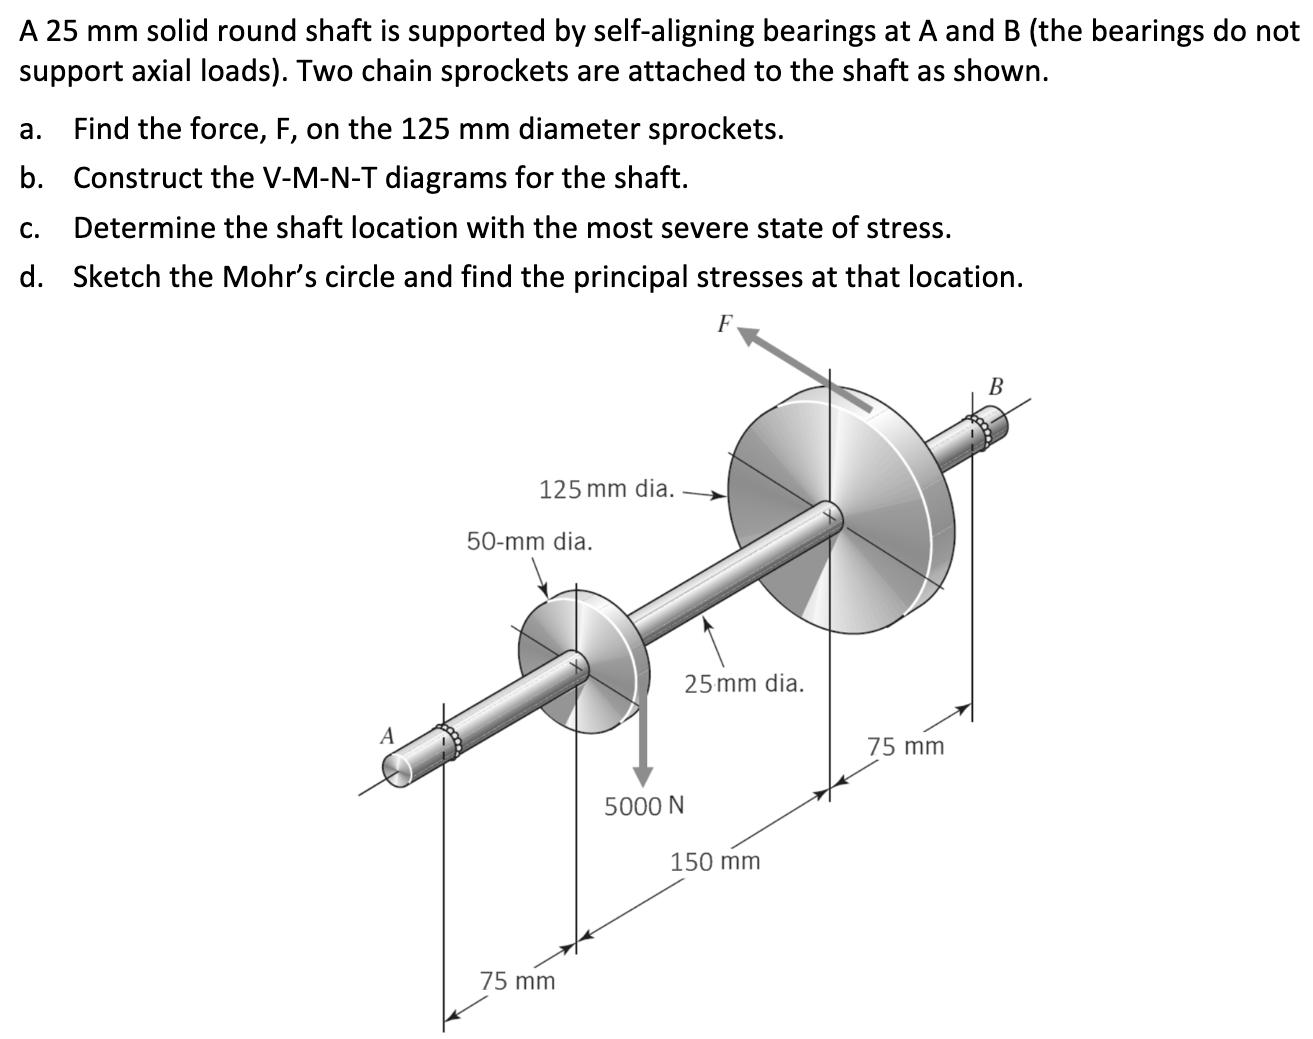 A 25 mm solid round shaft is supported by self-aligning bearings at A and B (the bearings do not support